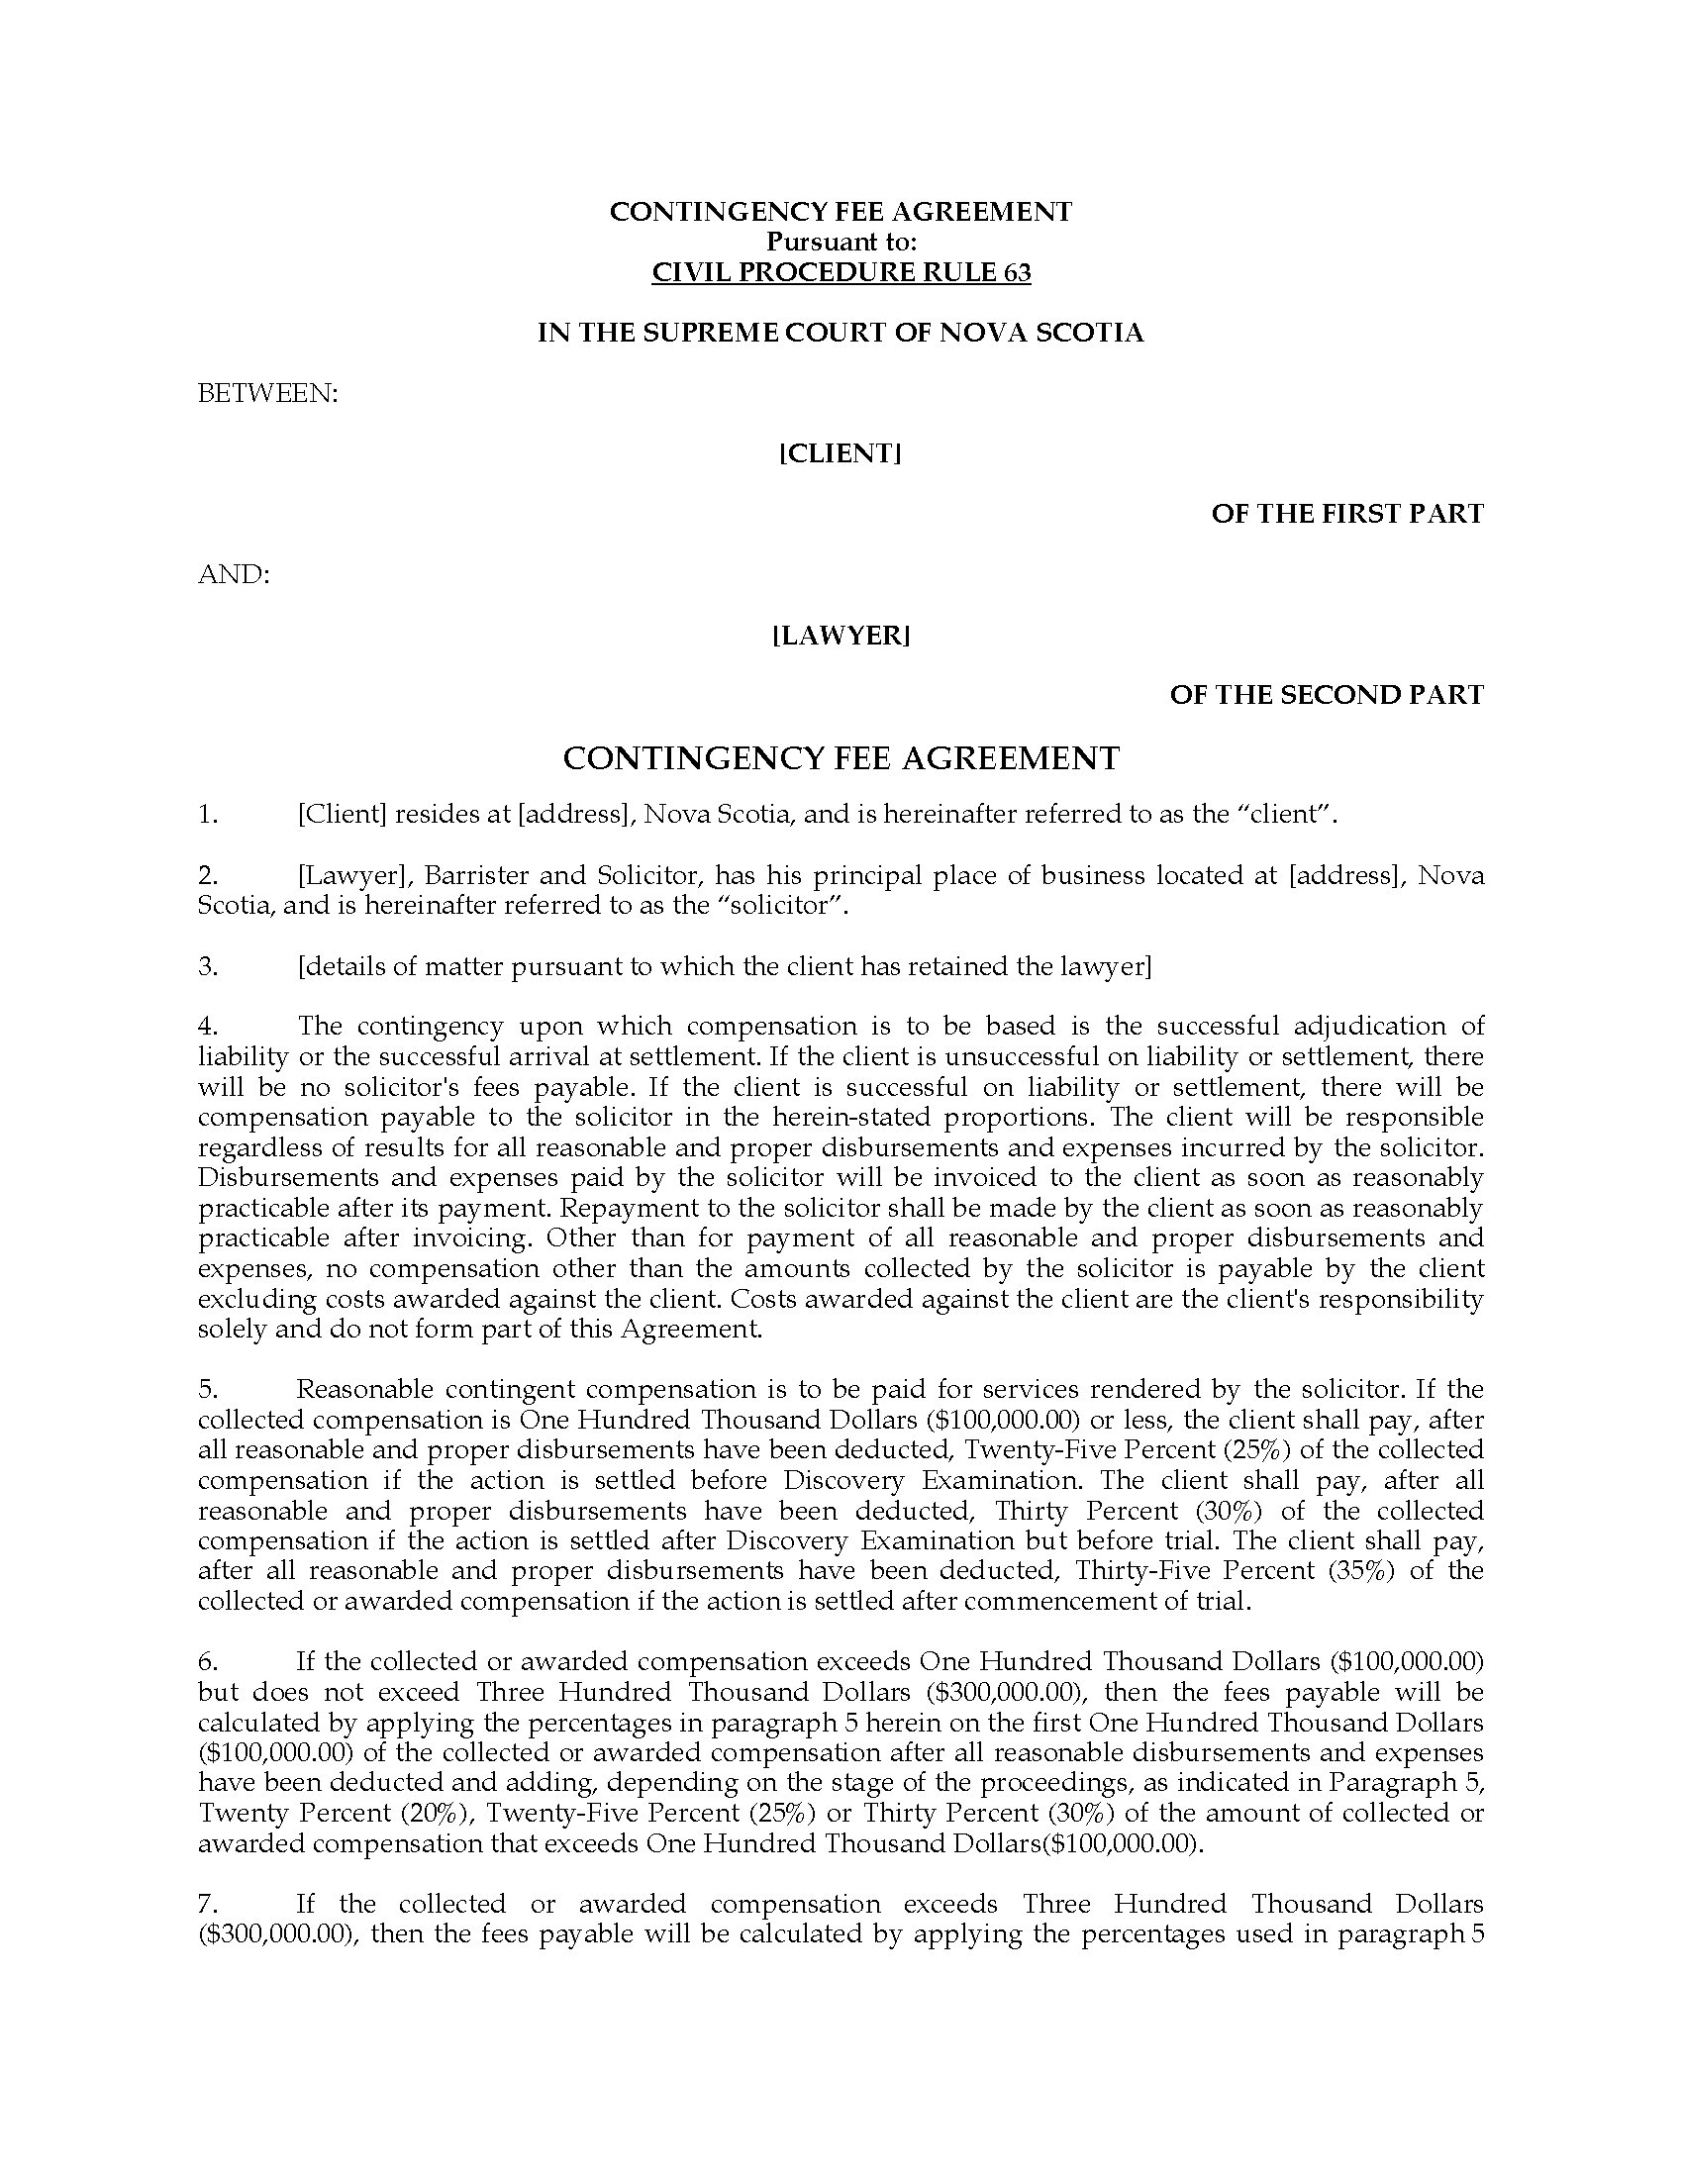 Nova Scotia Lawyer'S Contingency Fee Agreement | Legal Forms And within contingency fee agreement template